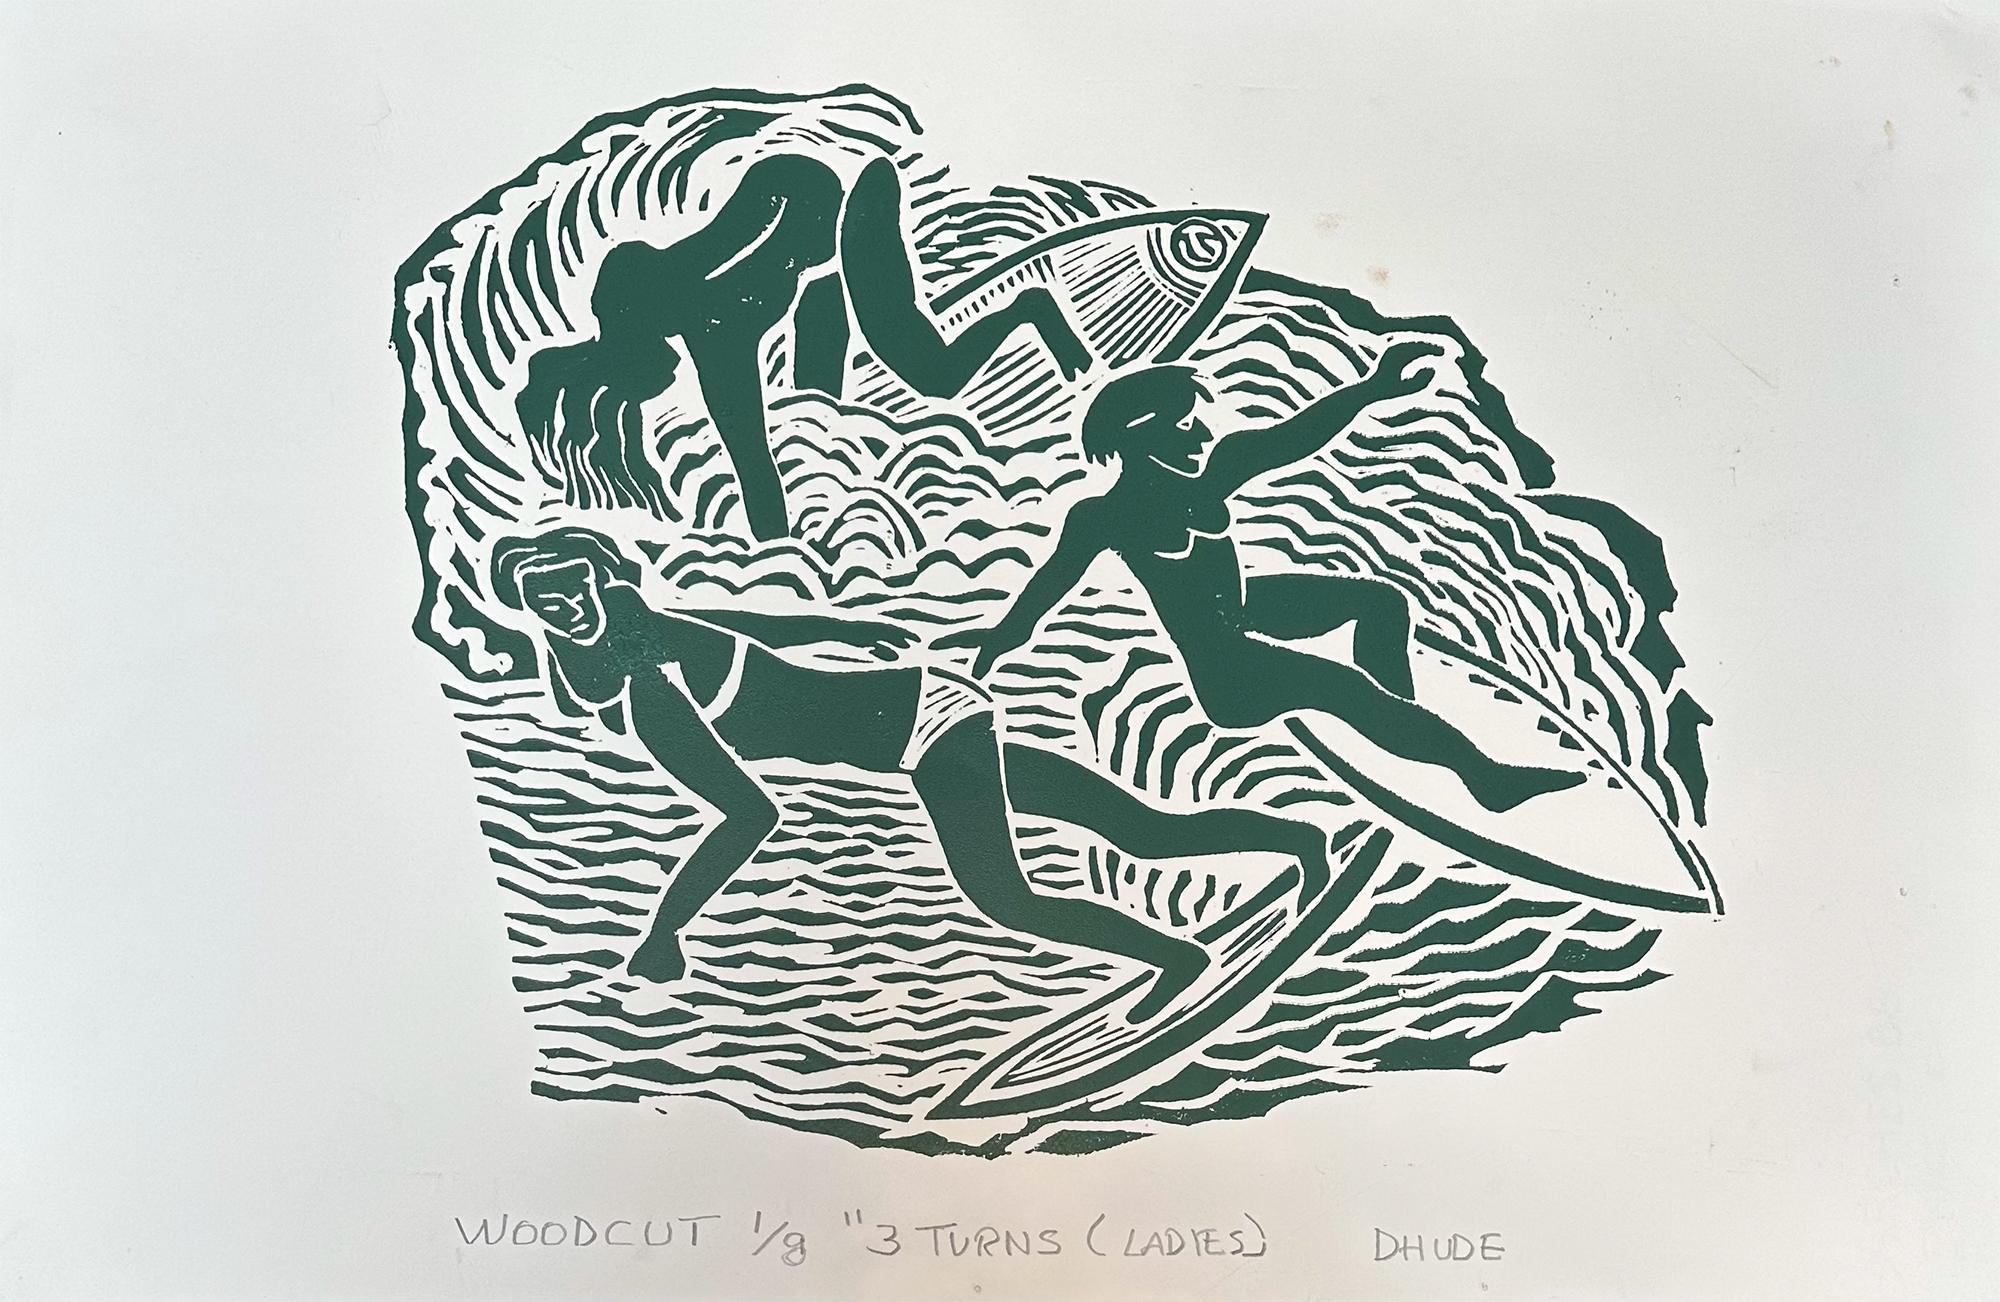 3  Turns (ladies) - Surfing Art - Figurative - Woodcut Print By Marc Zimmerman

Limited Edition 01/04

This masterwork is exhibited in the Zimmerman Gallery, Carmel CA.

Immerse yourself in the captivating world of surfing and ocean vibes with Marc